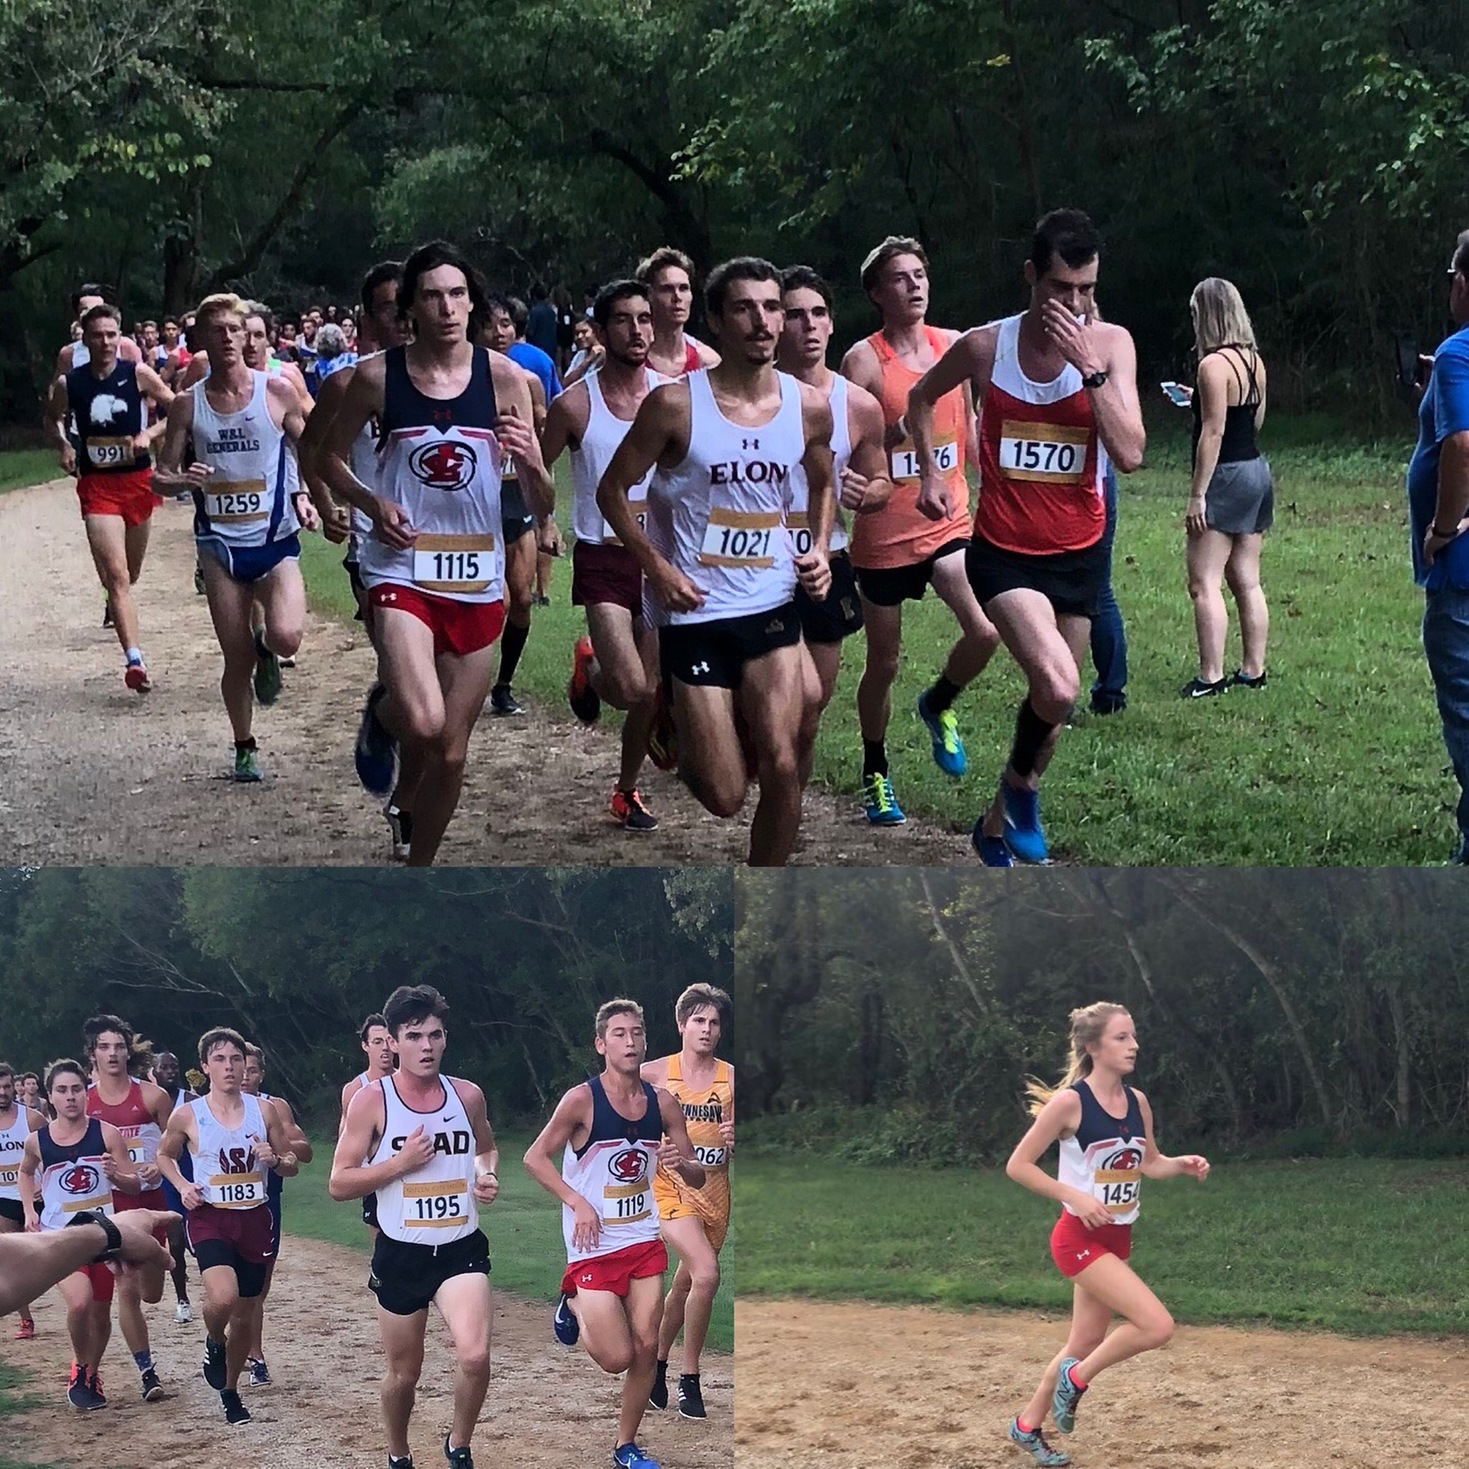 Hurricanes Continue to Impress with Performance at Queen City Invitational